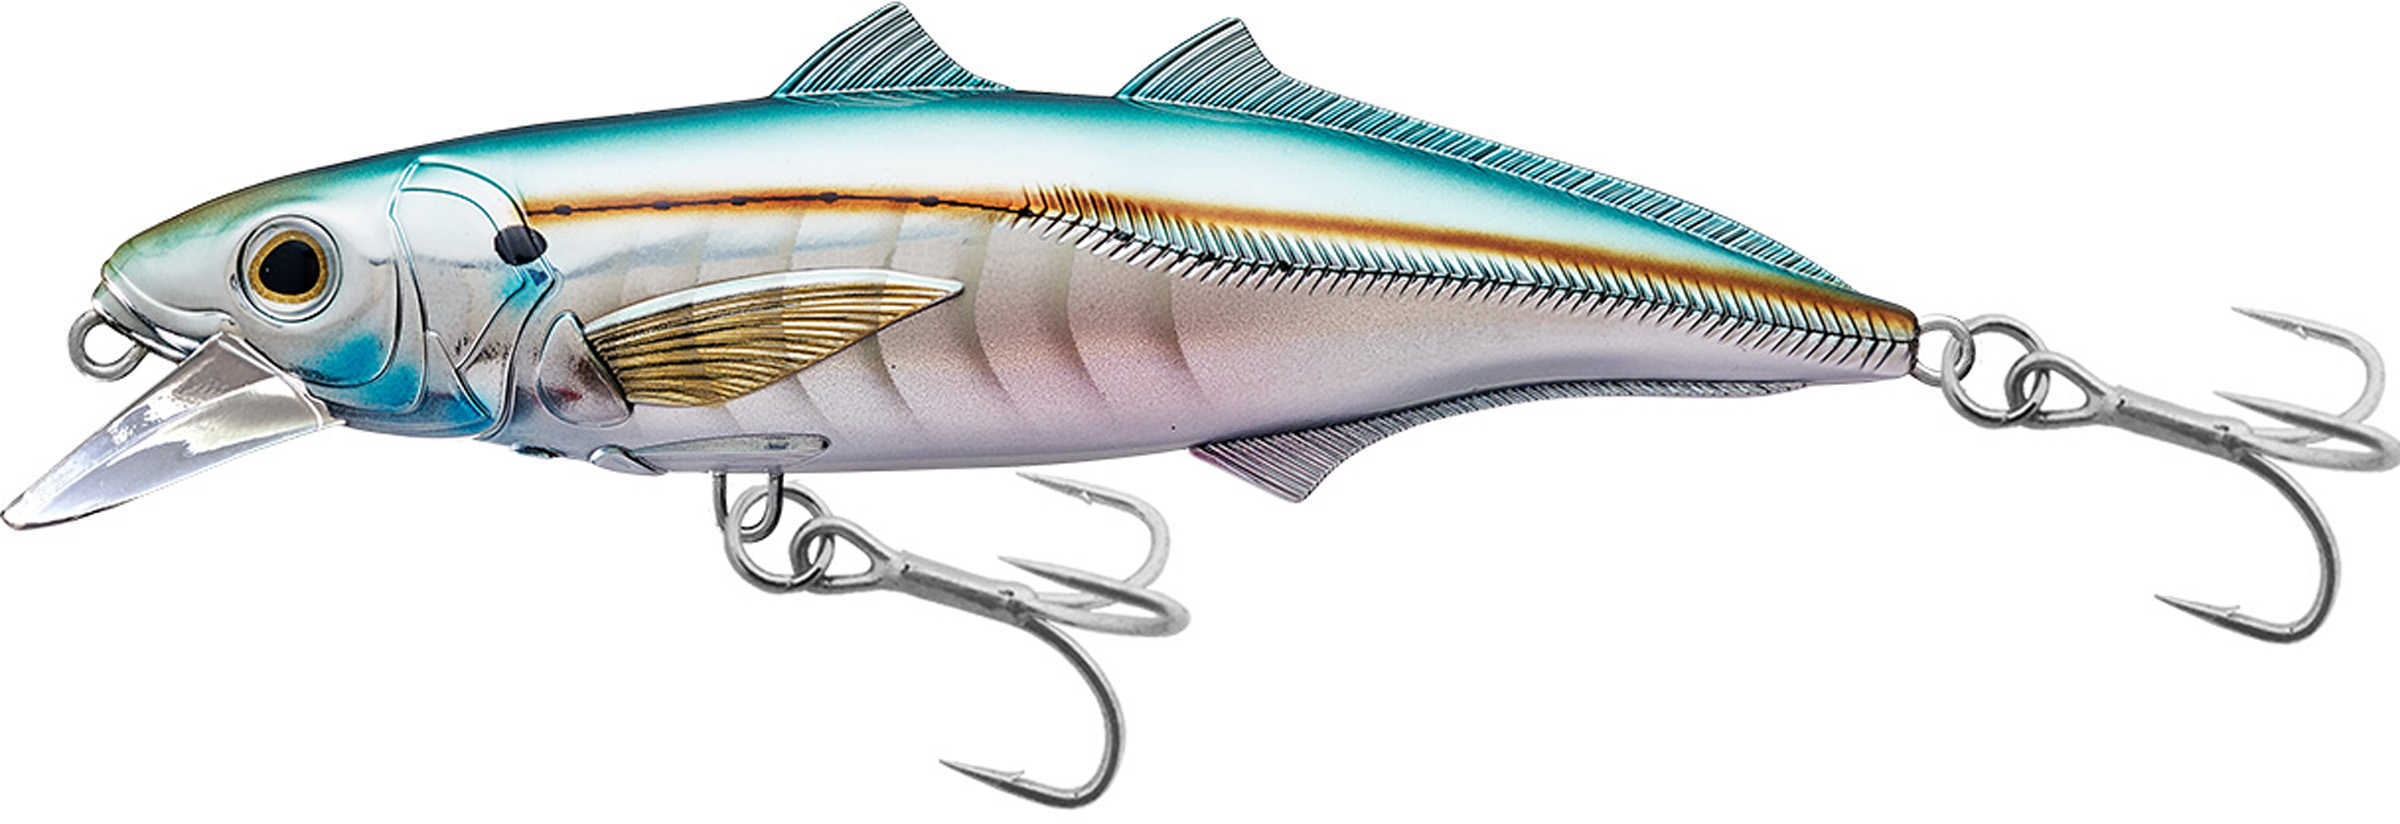 LIVETARGET Lures / Koppers Fishing and Tackle Corp Cigar Minow Jerkbait 6" Number 2/0 Hook Size 2-6 Depth Pearl/Aqua Md: CMJ152S9